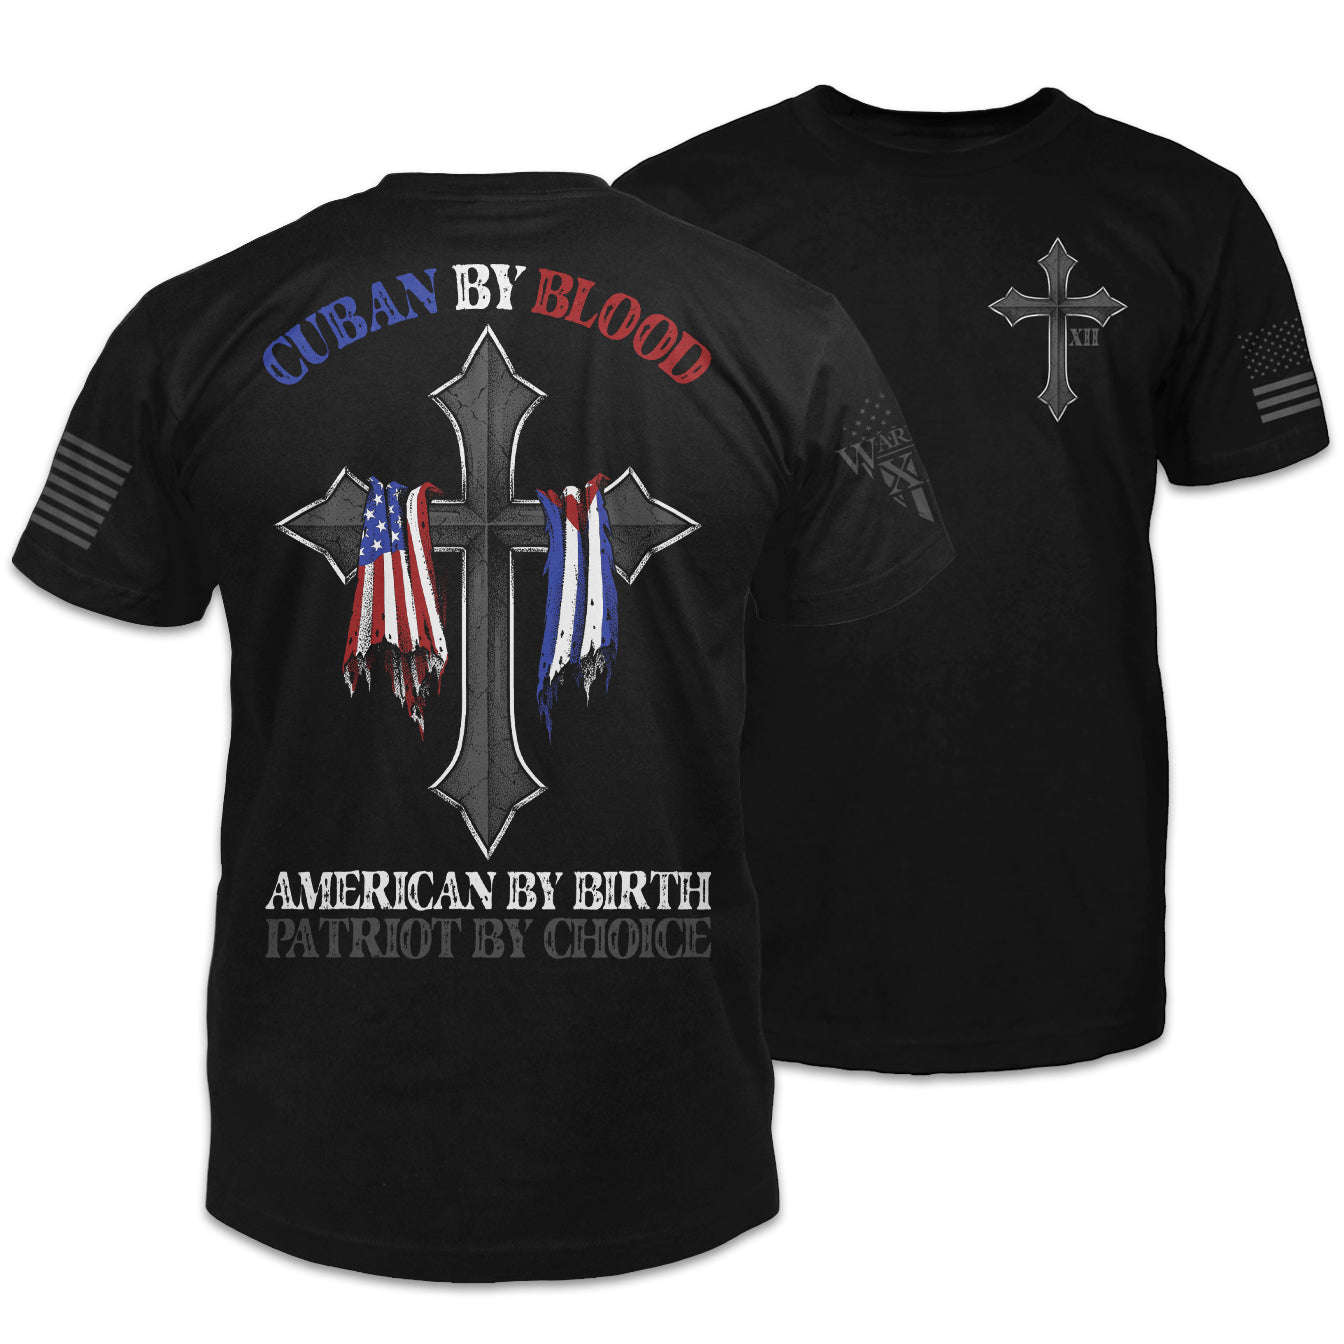 The back and front of a black t-shirt. The back features a cross with American and Cuban flags draped over it and the words "Cuban by Blood, American By Birth, Patriot by Choice," the front of the shirt features a small pocket image of a cross